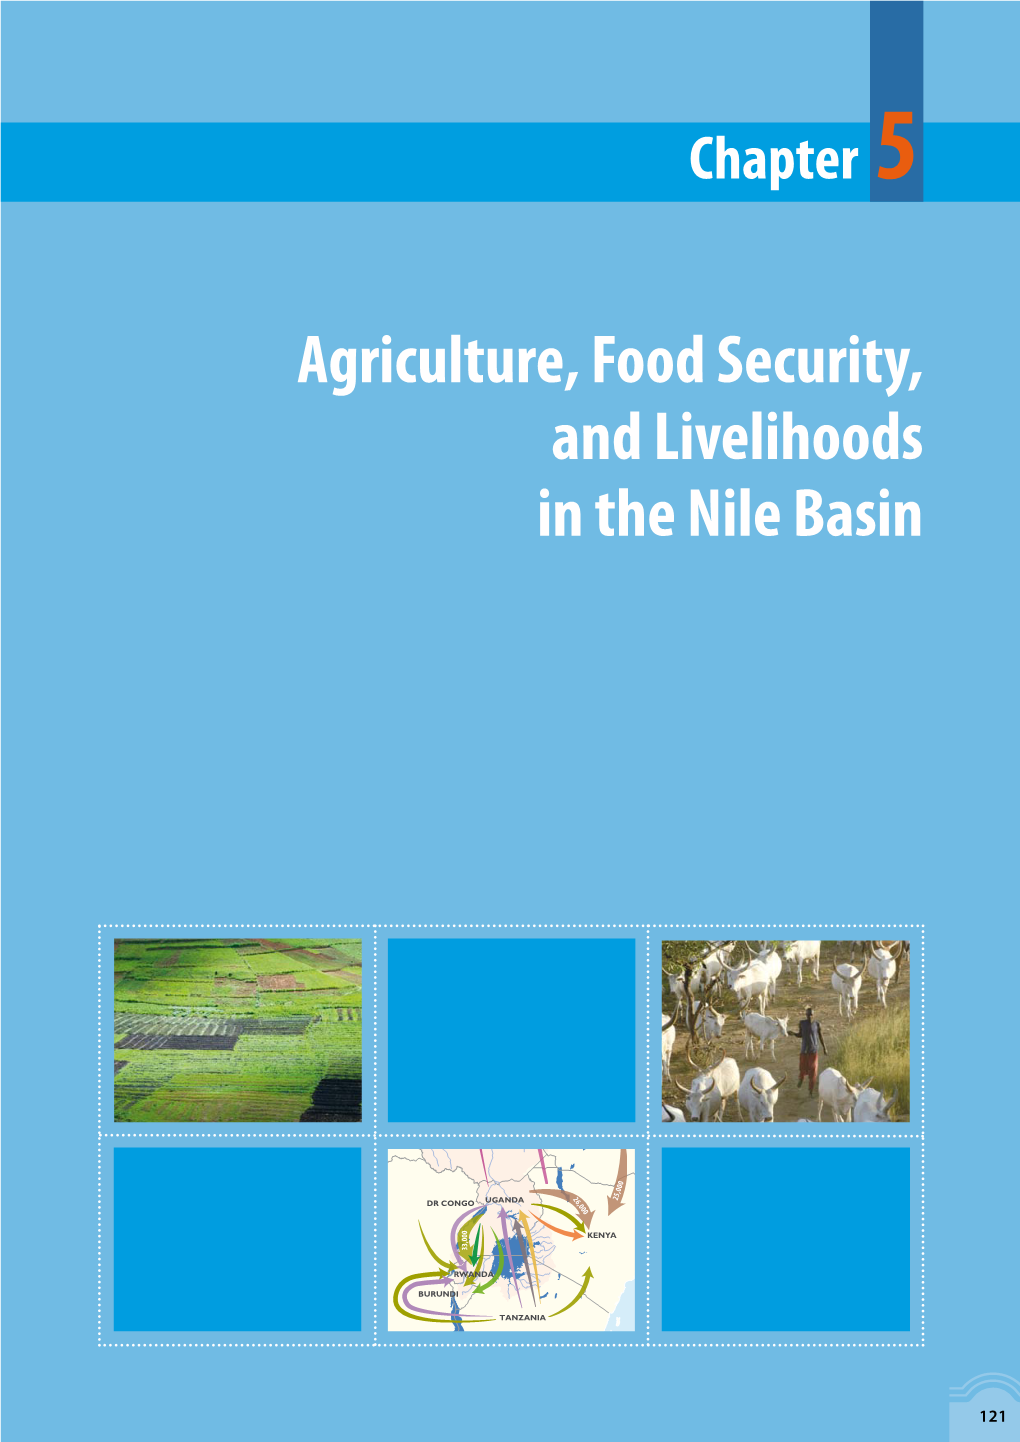 Agriculture, Food Security, and Livelihoods in the Nile Basin